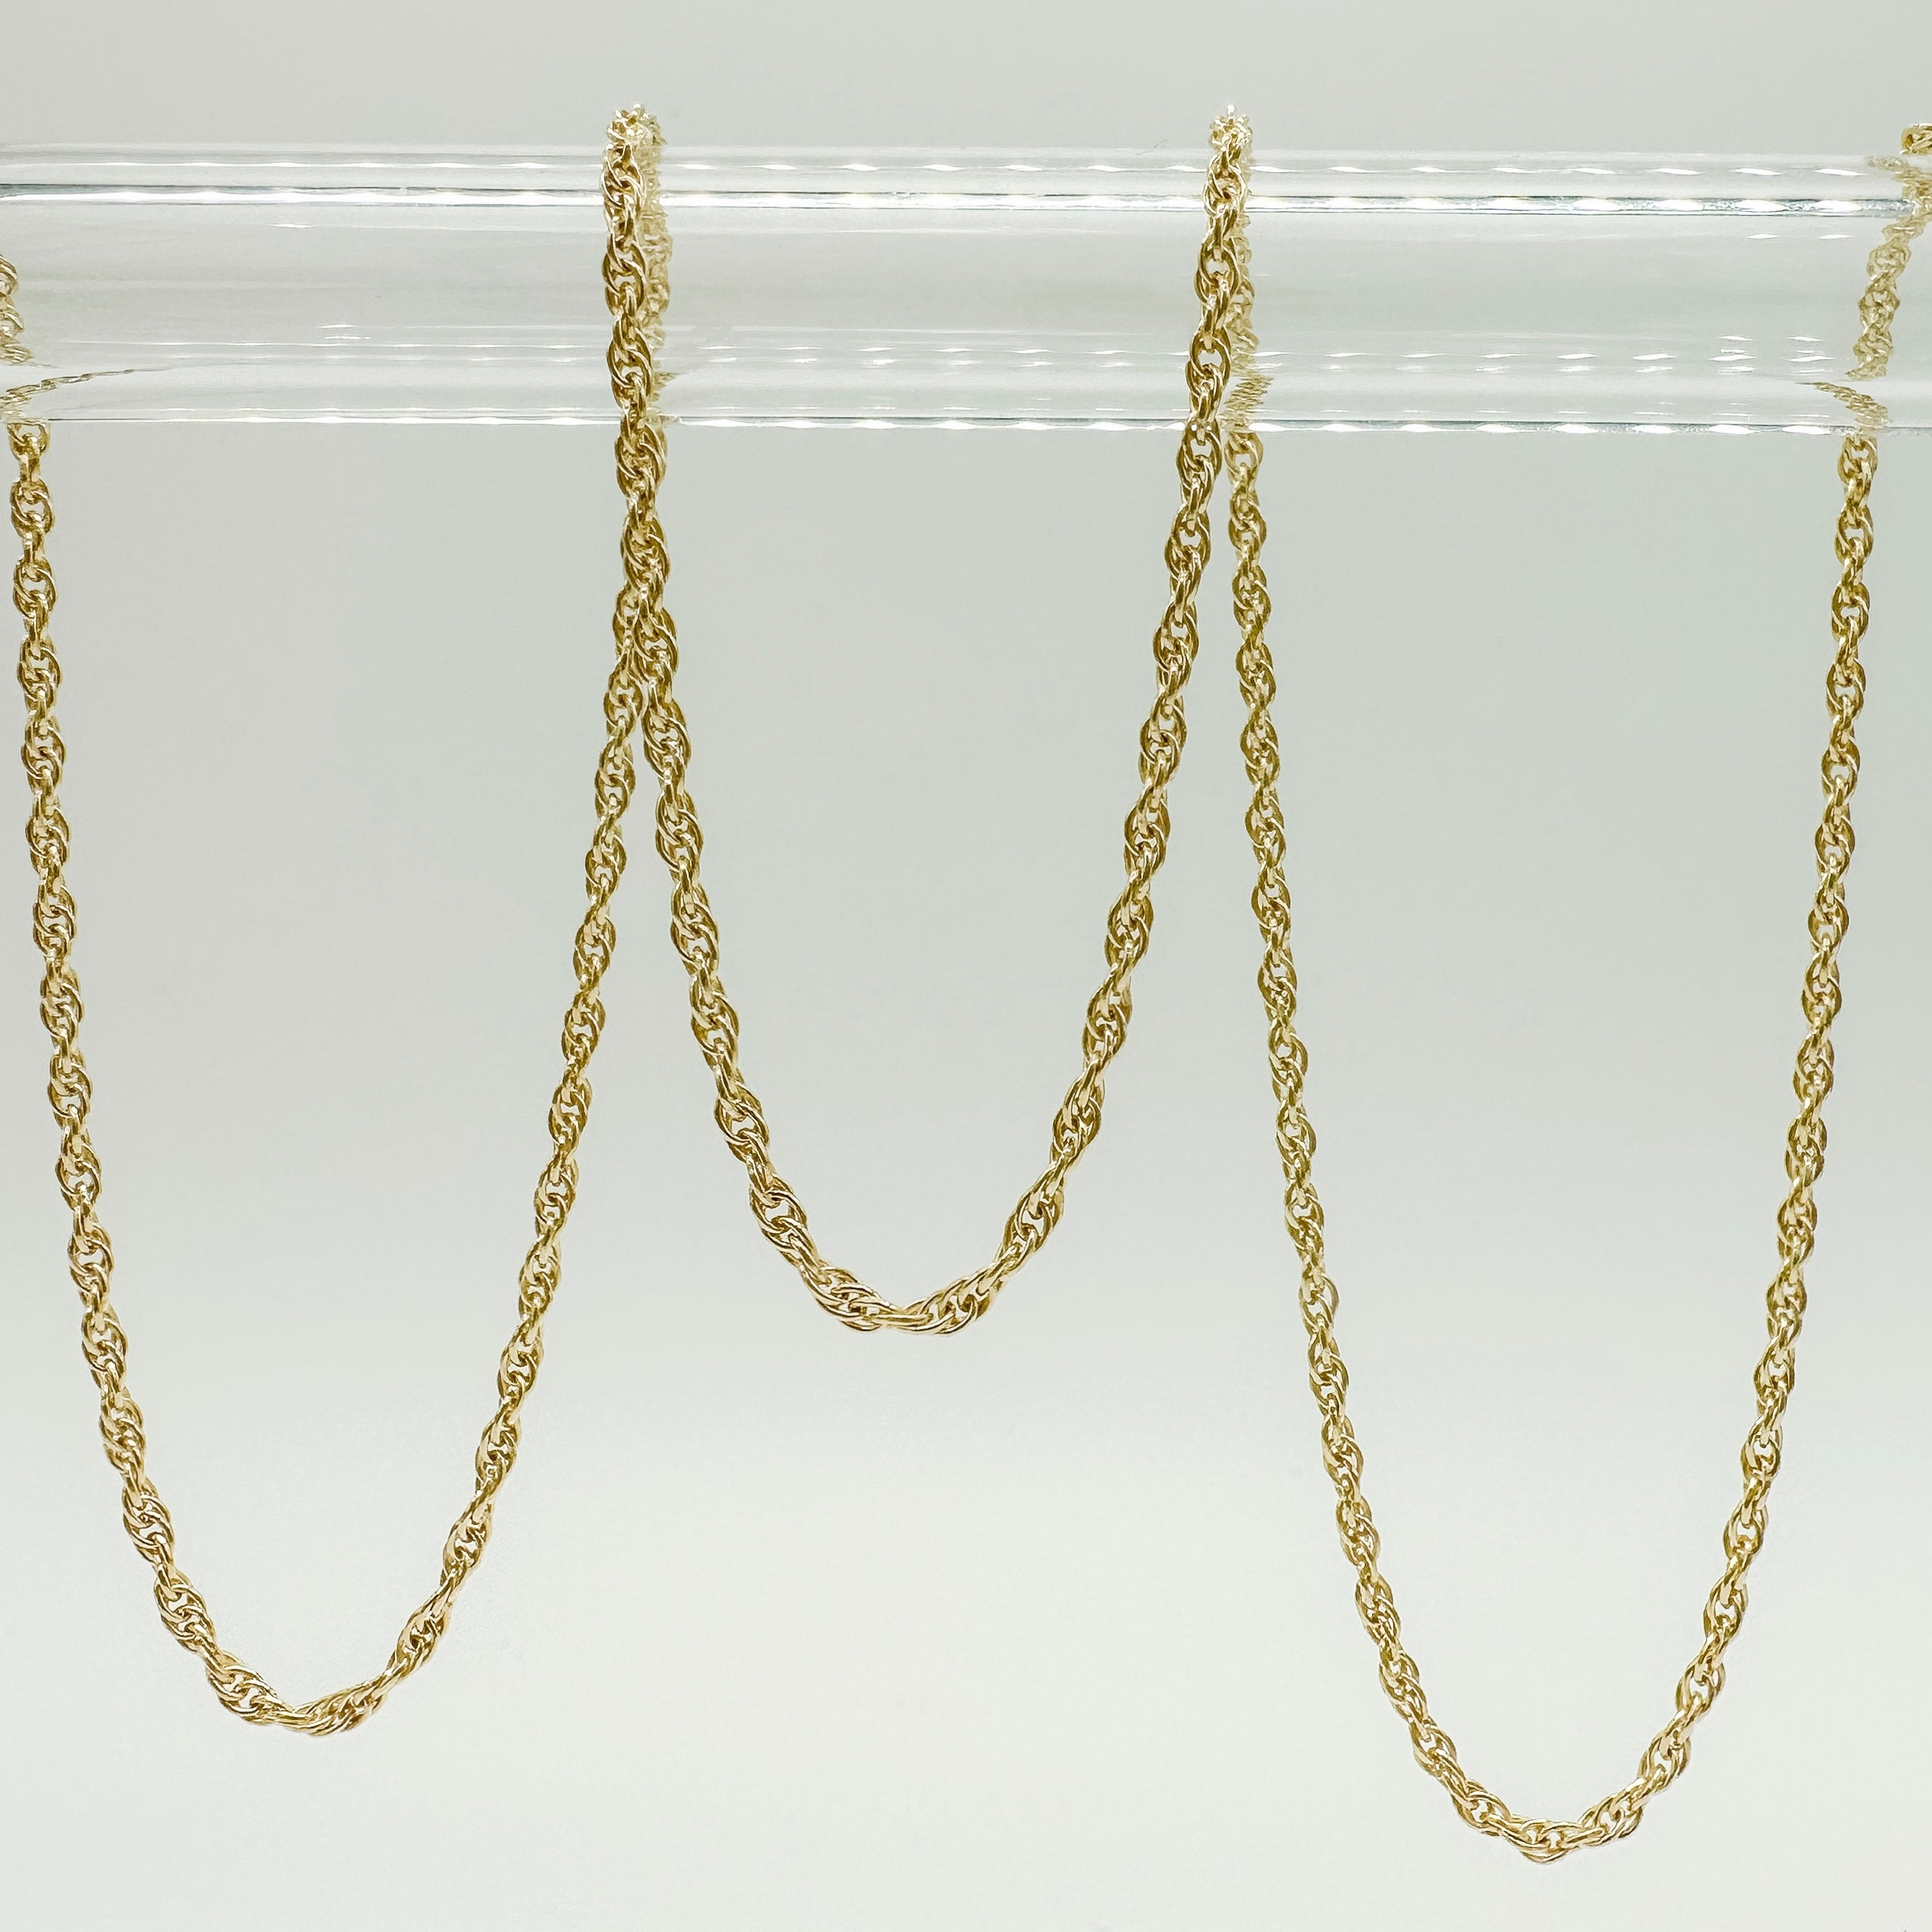 gold filled rope chain / thick rope chain / permanent jewelry chain / permanent jewelry supplies / permanent jewelry supplier